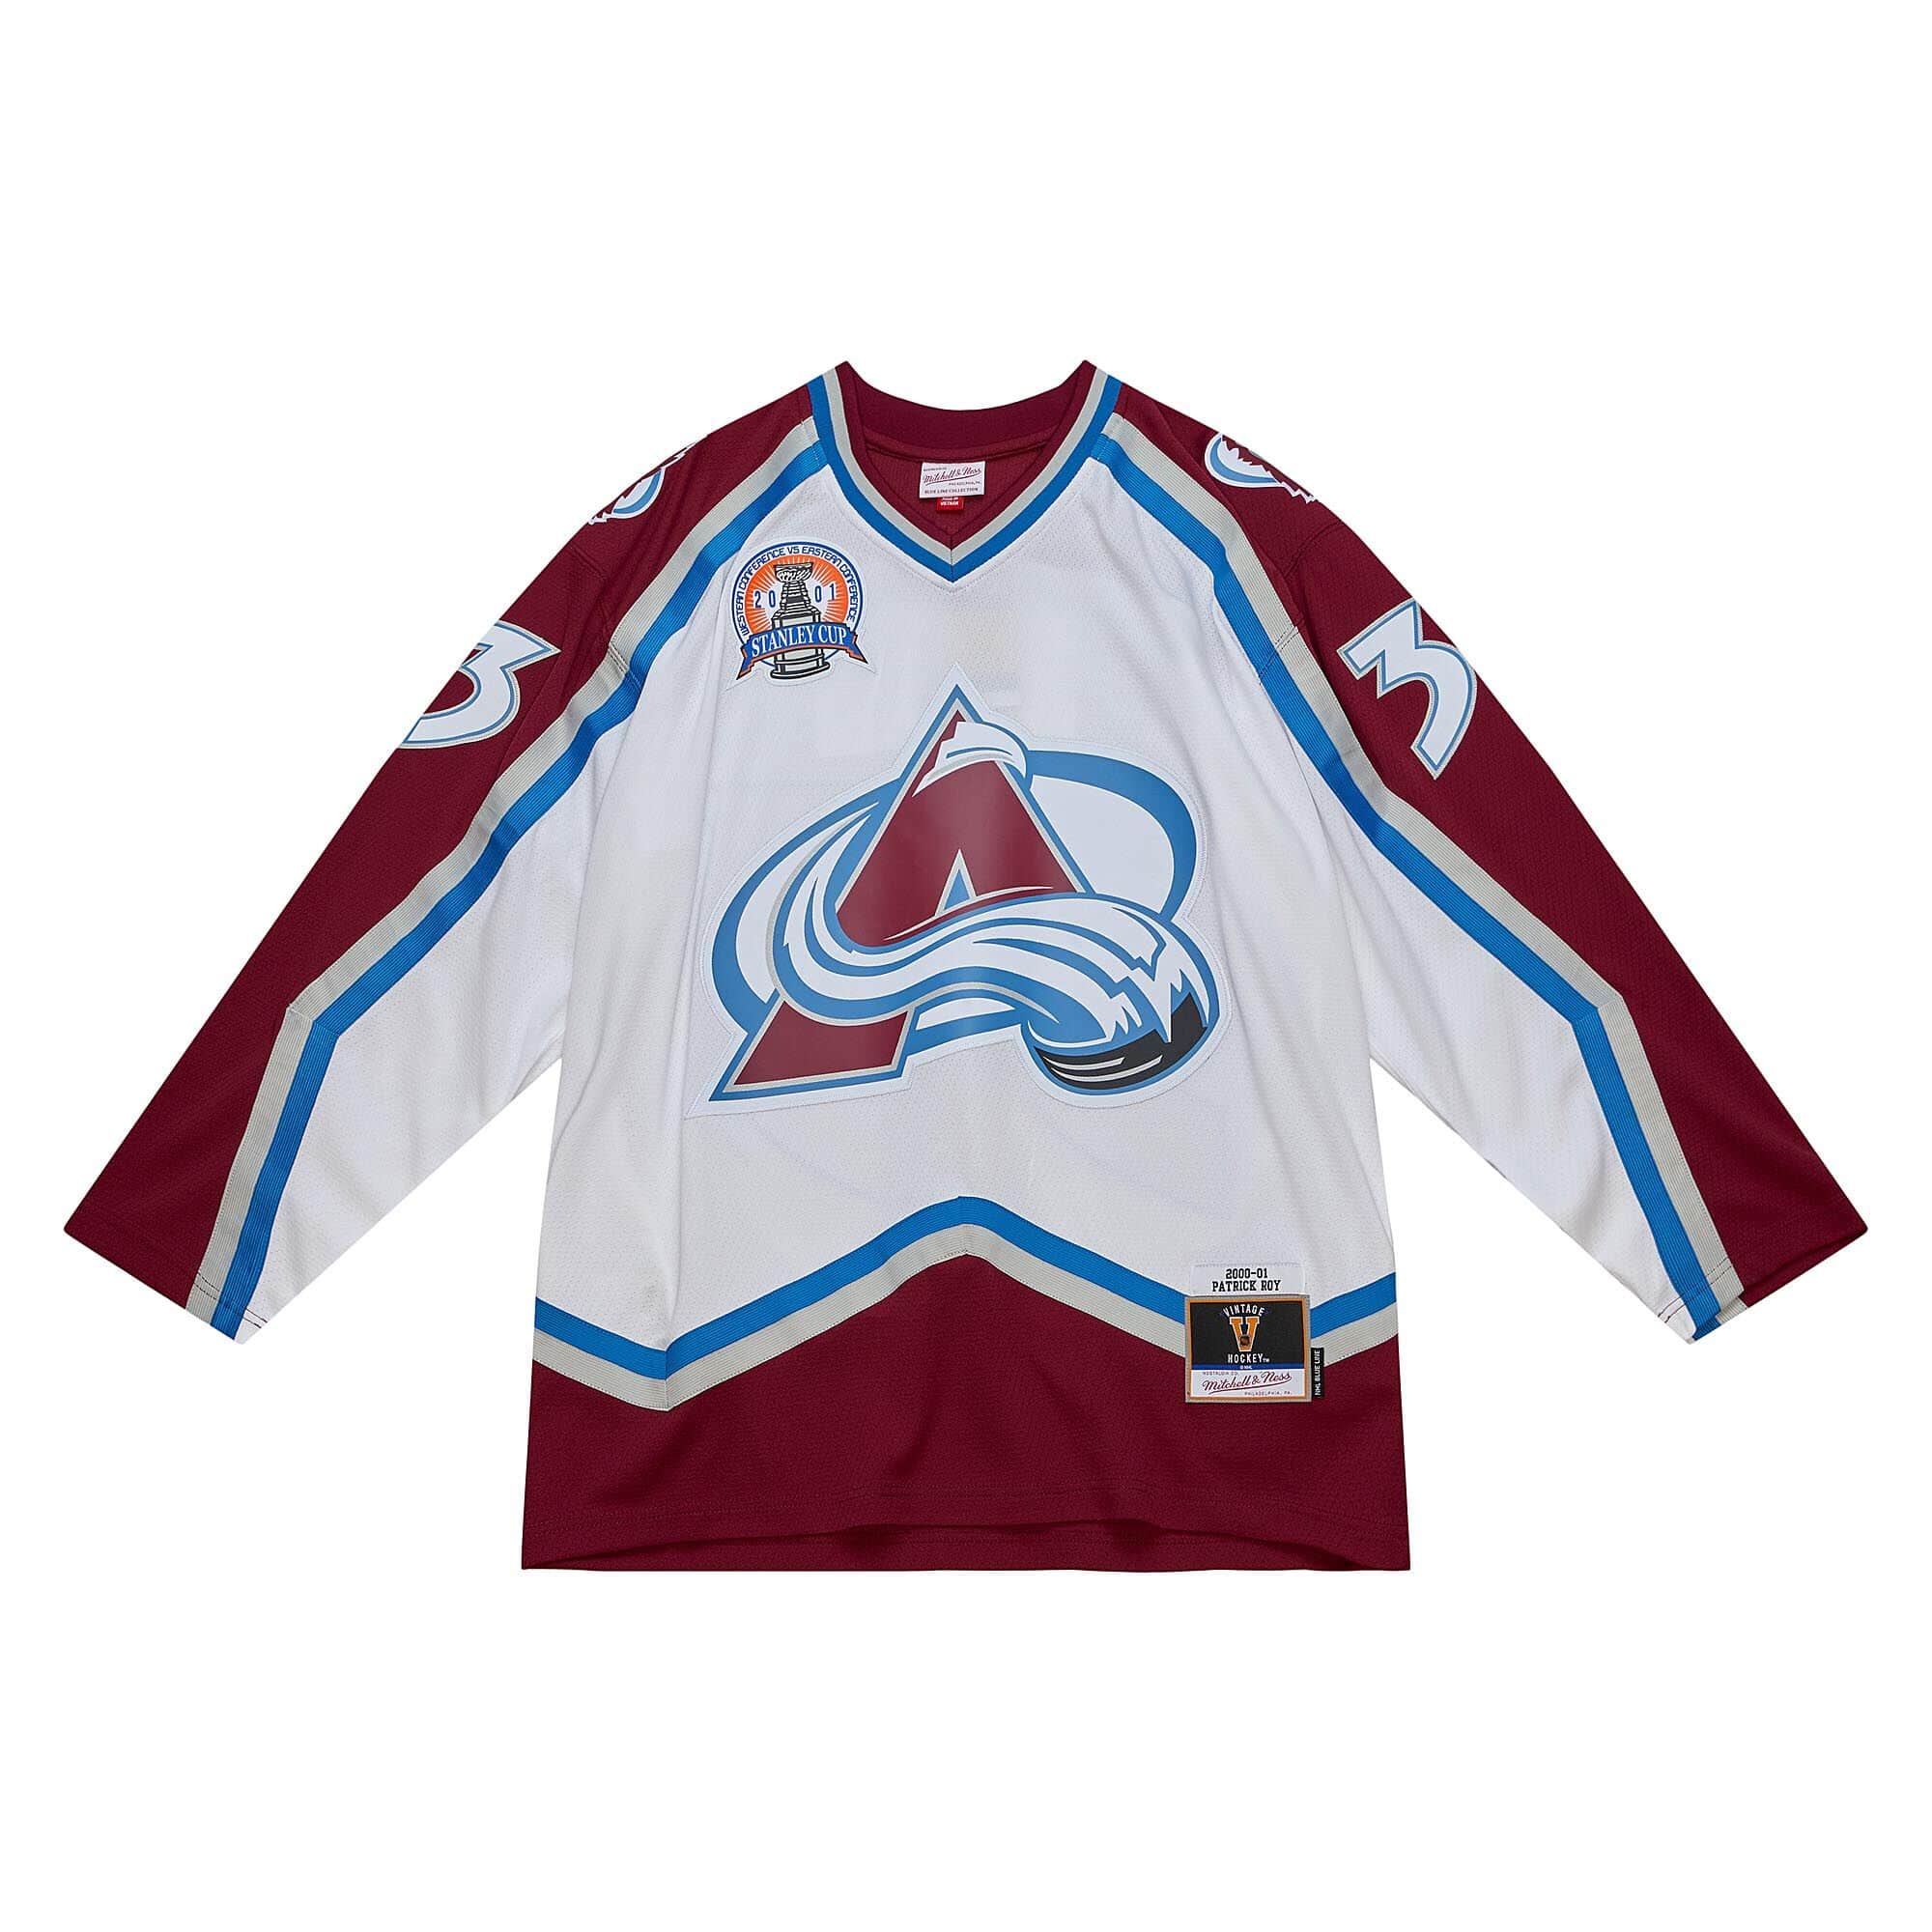 Here's a Rockies inspired Avalanche 3rd jersey concept I designed